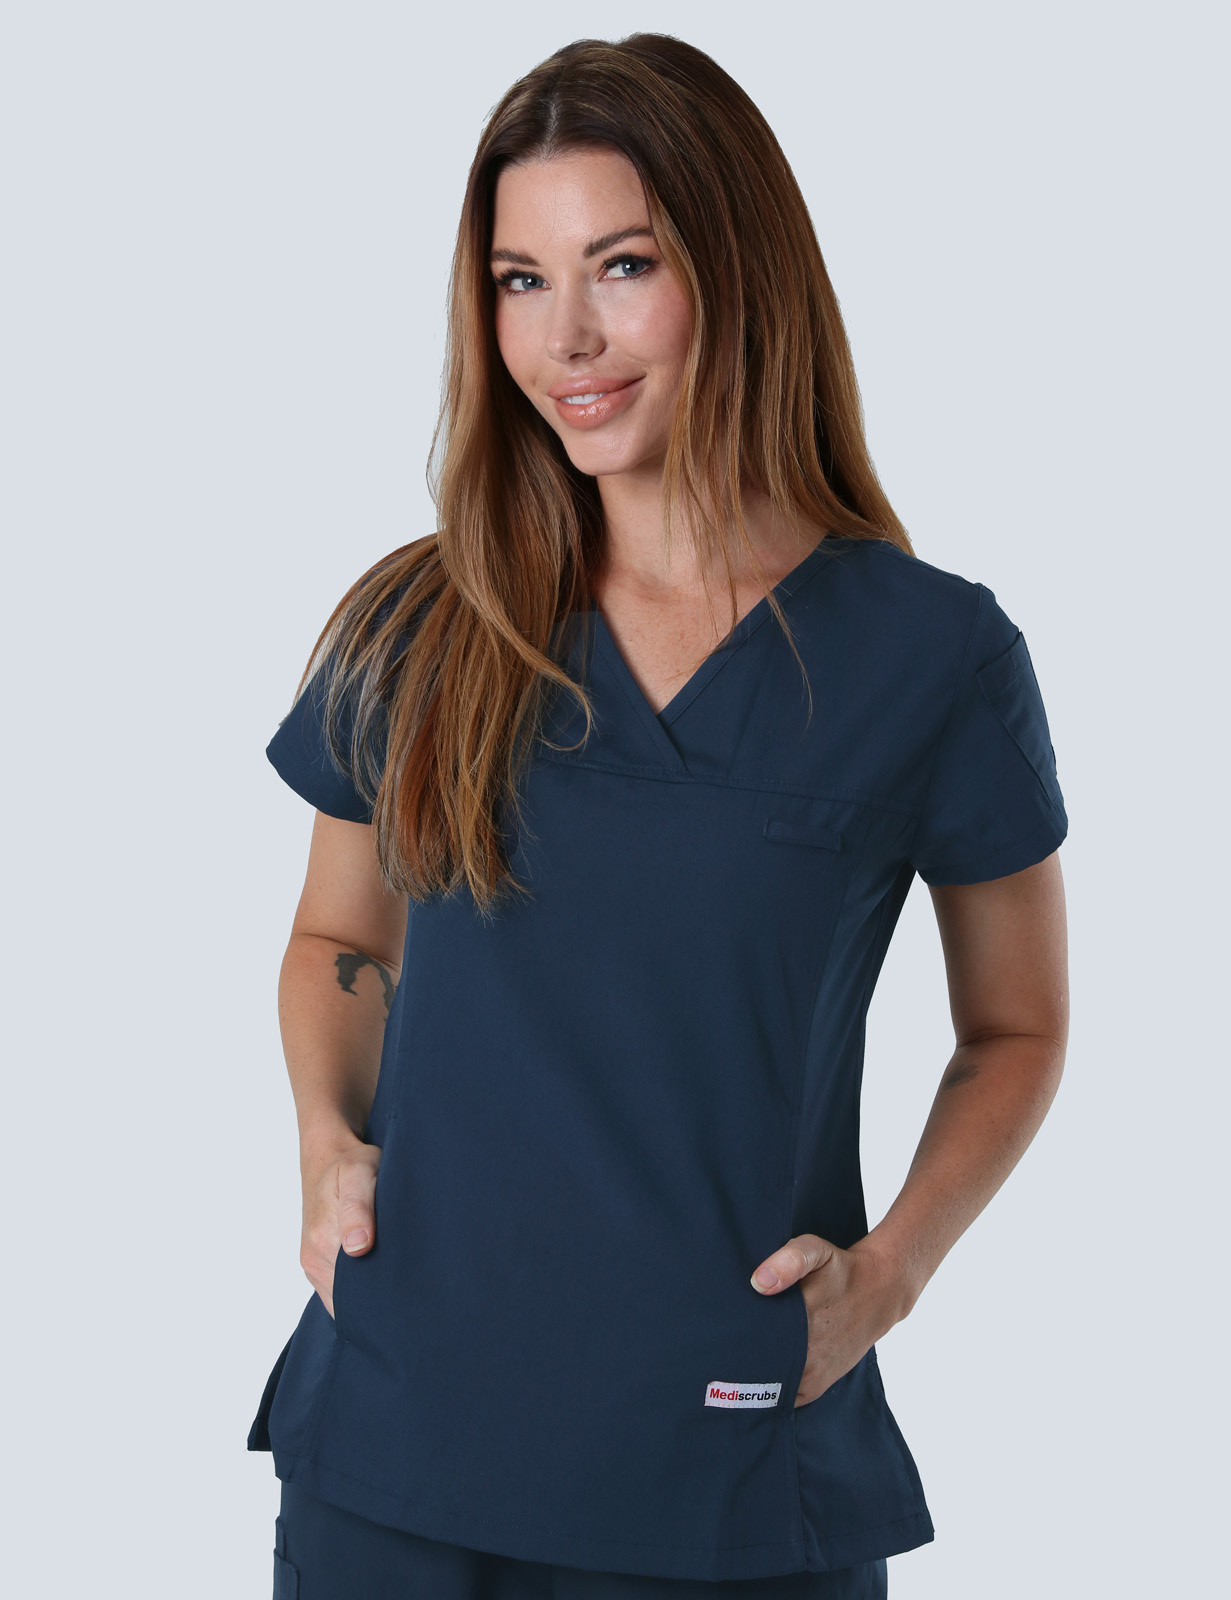 PAH - ACU (Women's Fit Solid Scrub Top and Cargo Pants in Navy incl Logos)